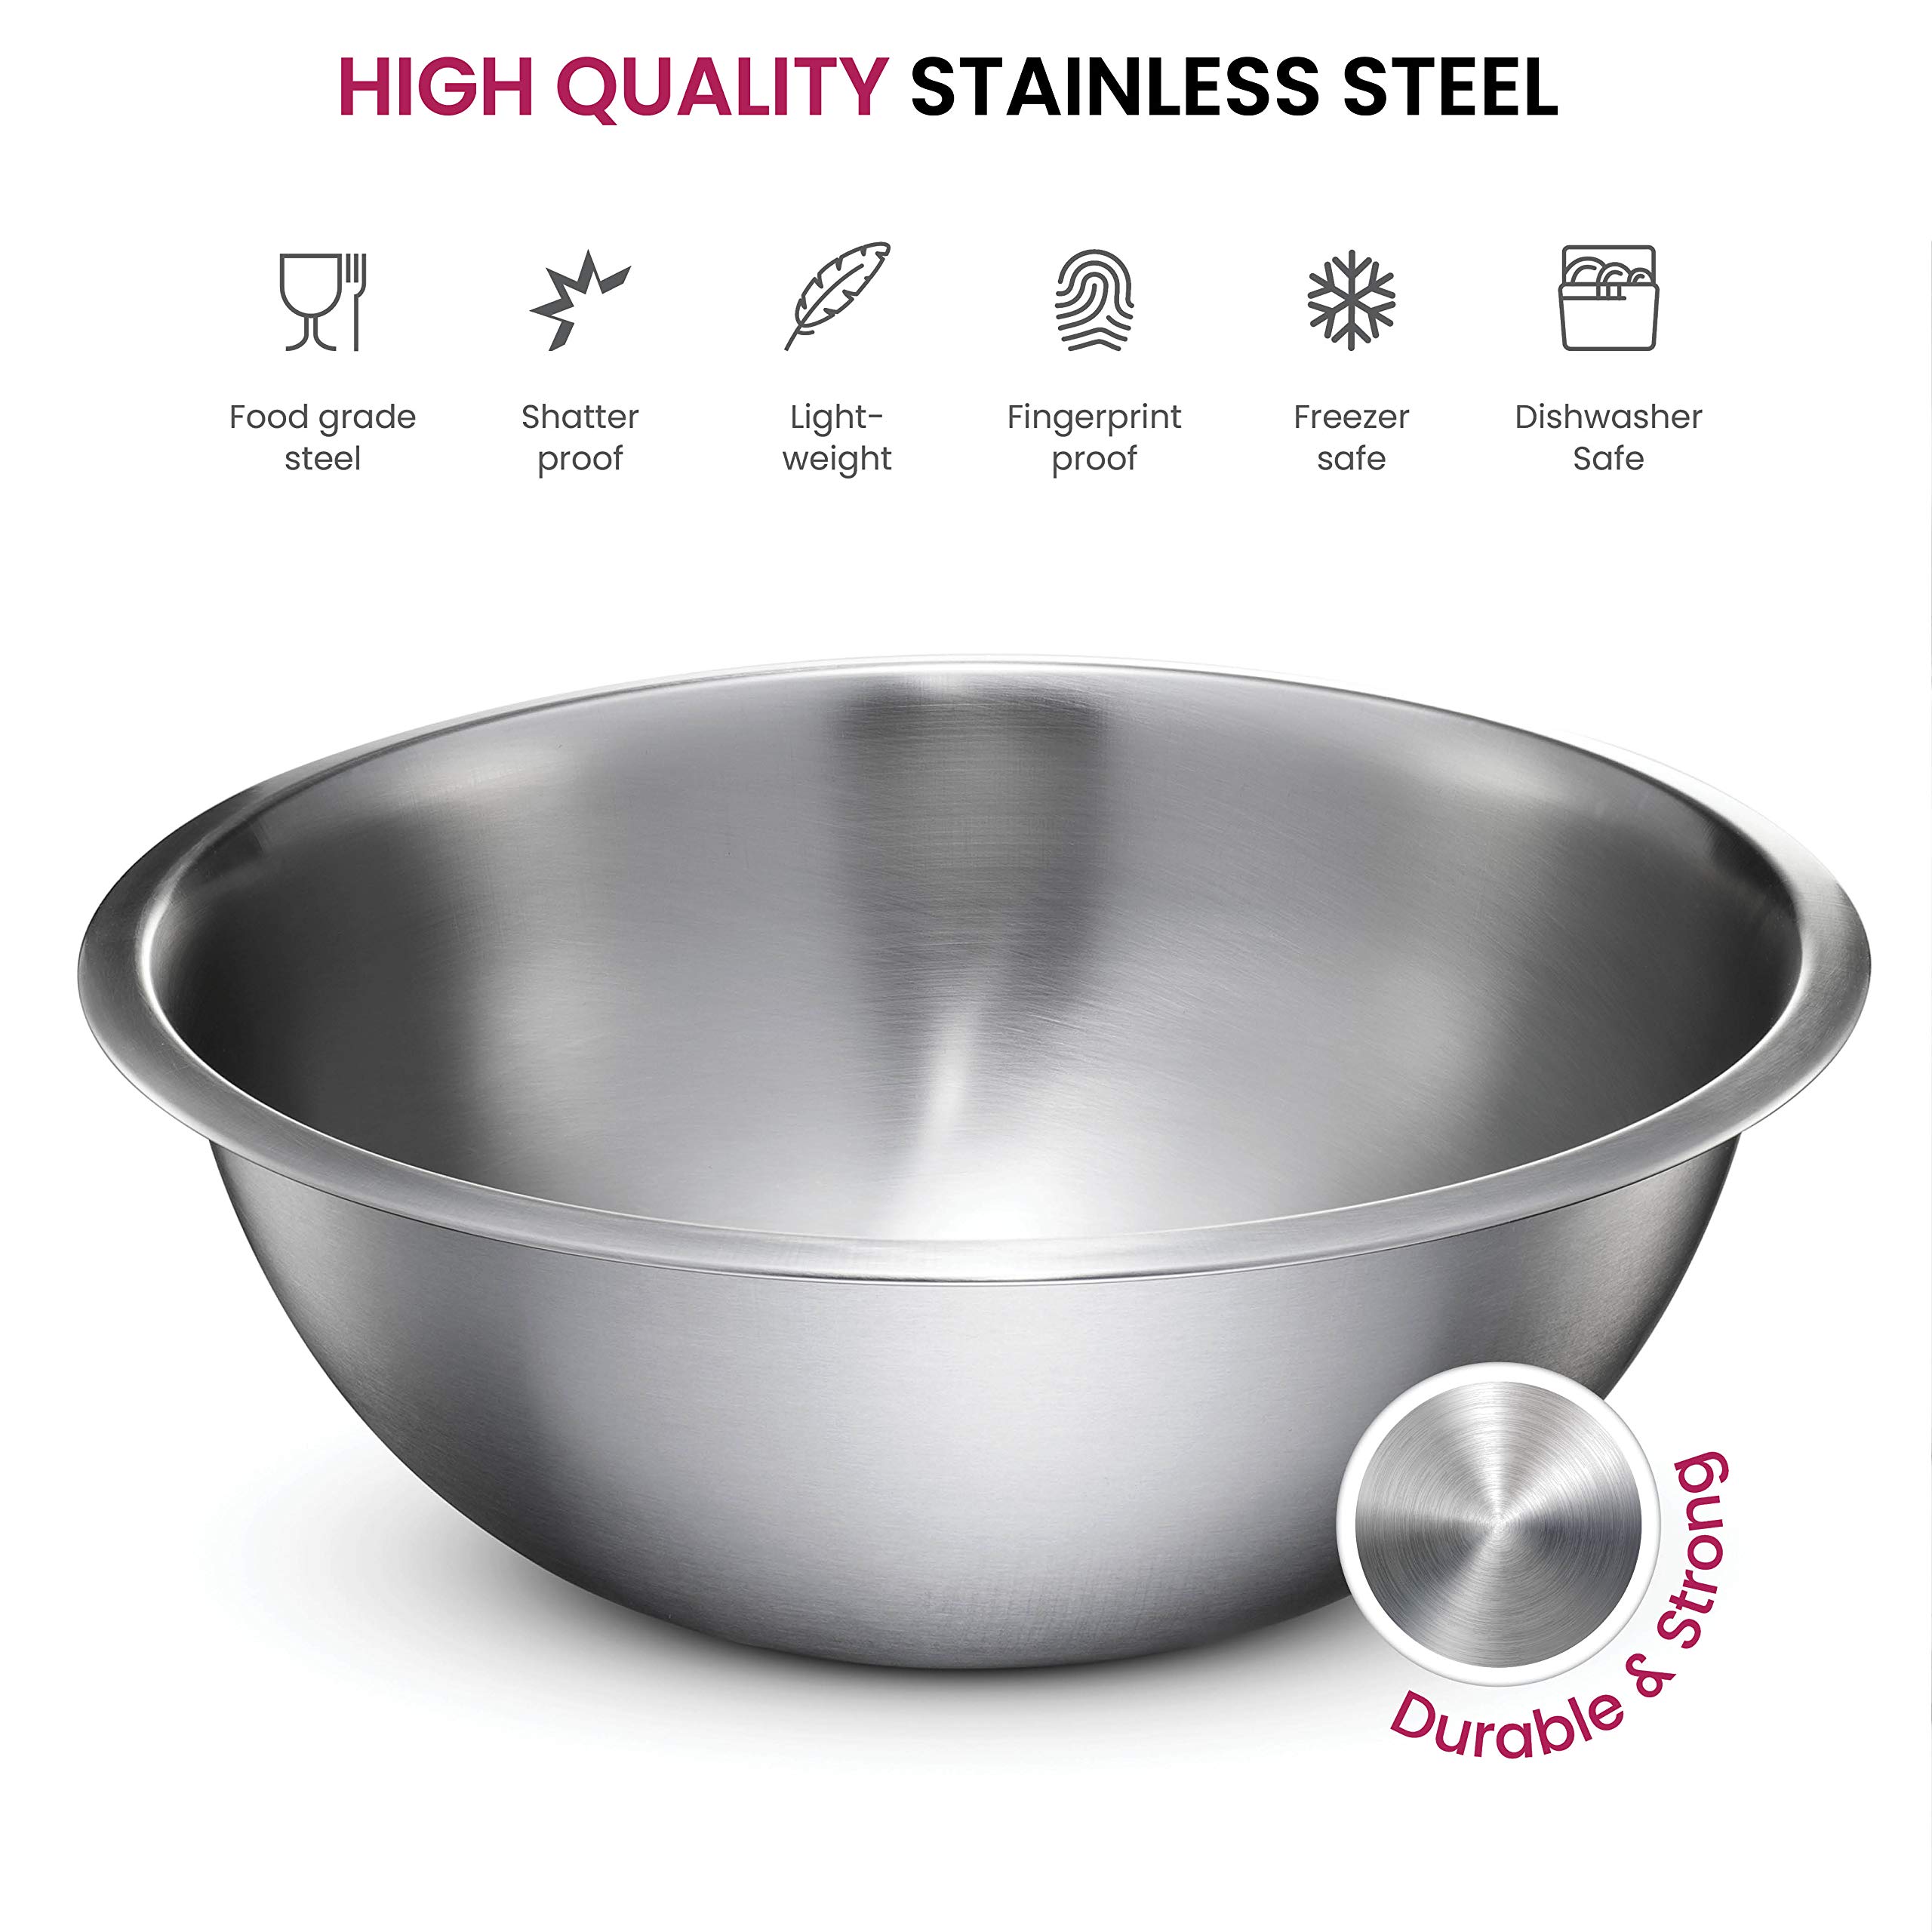 FineDine Stainless Steel Mixing Bowls (Set of 6) - Easy To Clean, Nesting Bowls for Space Saving Storage, Great for Cooking, Baking, Prepping